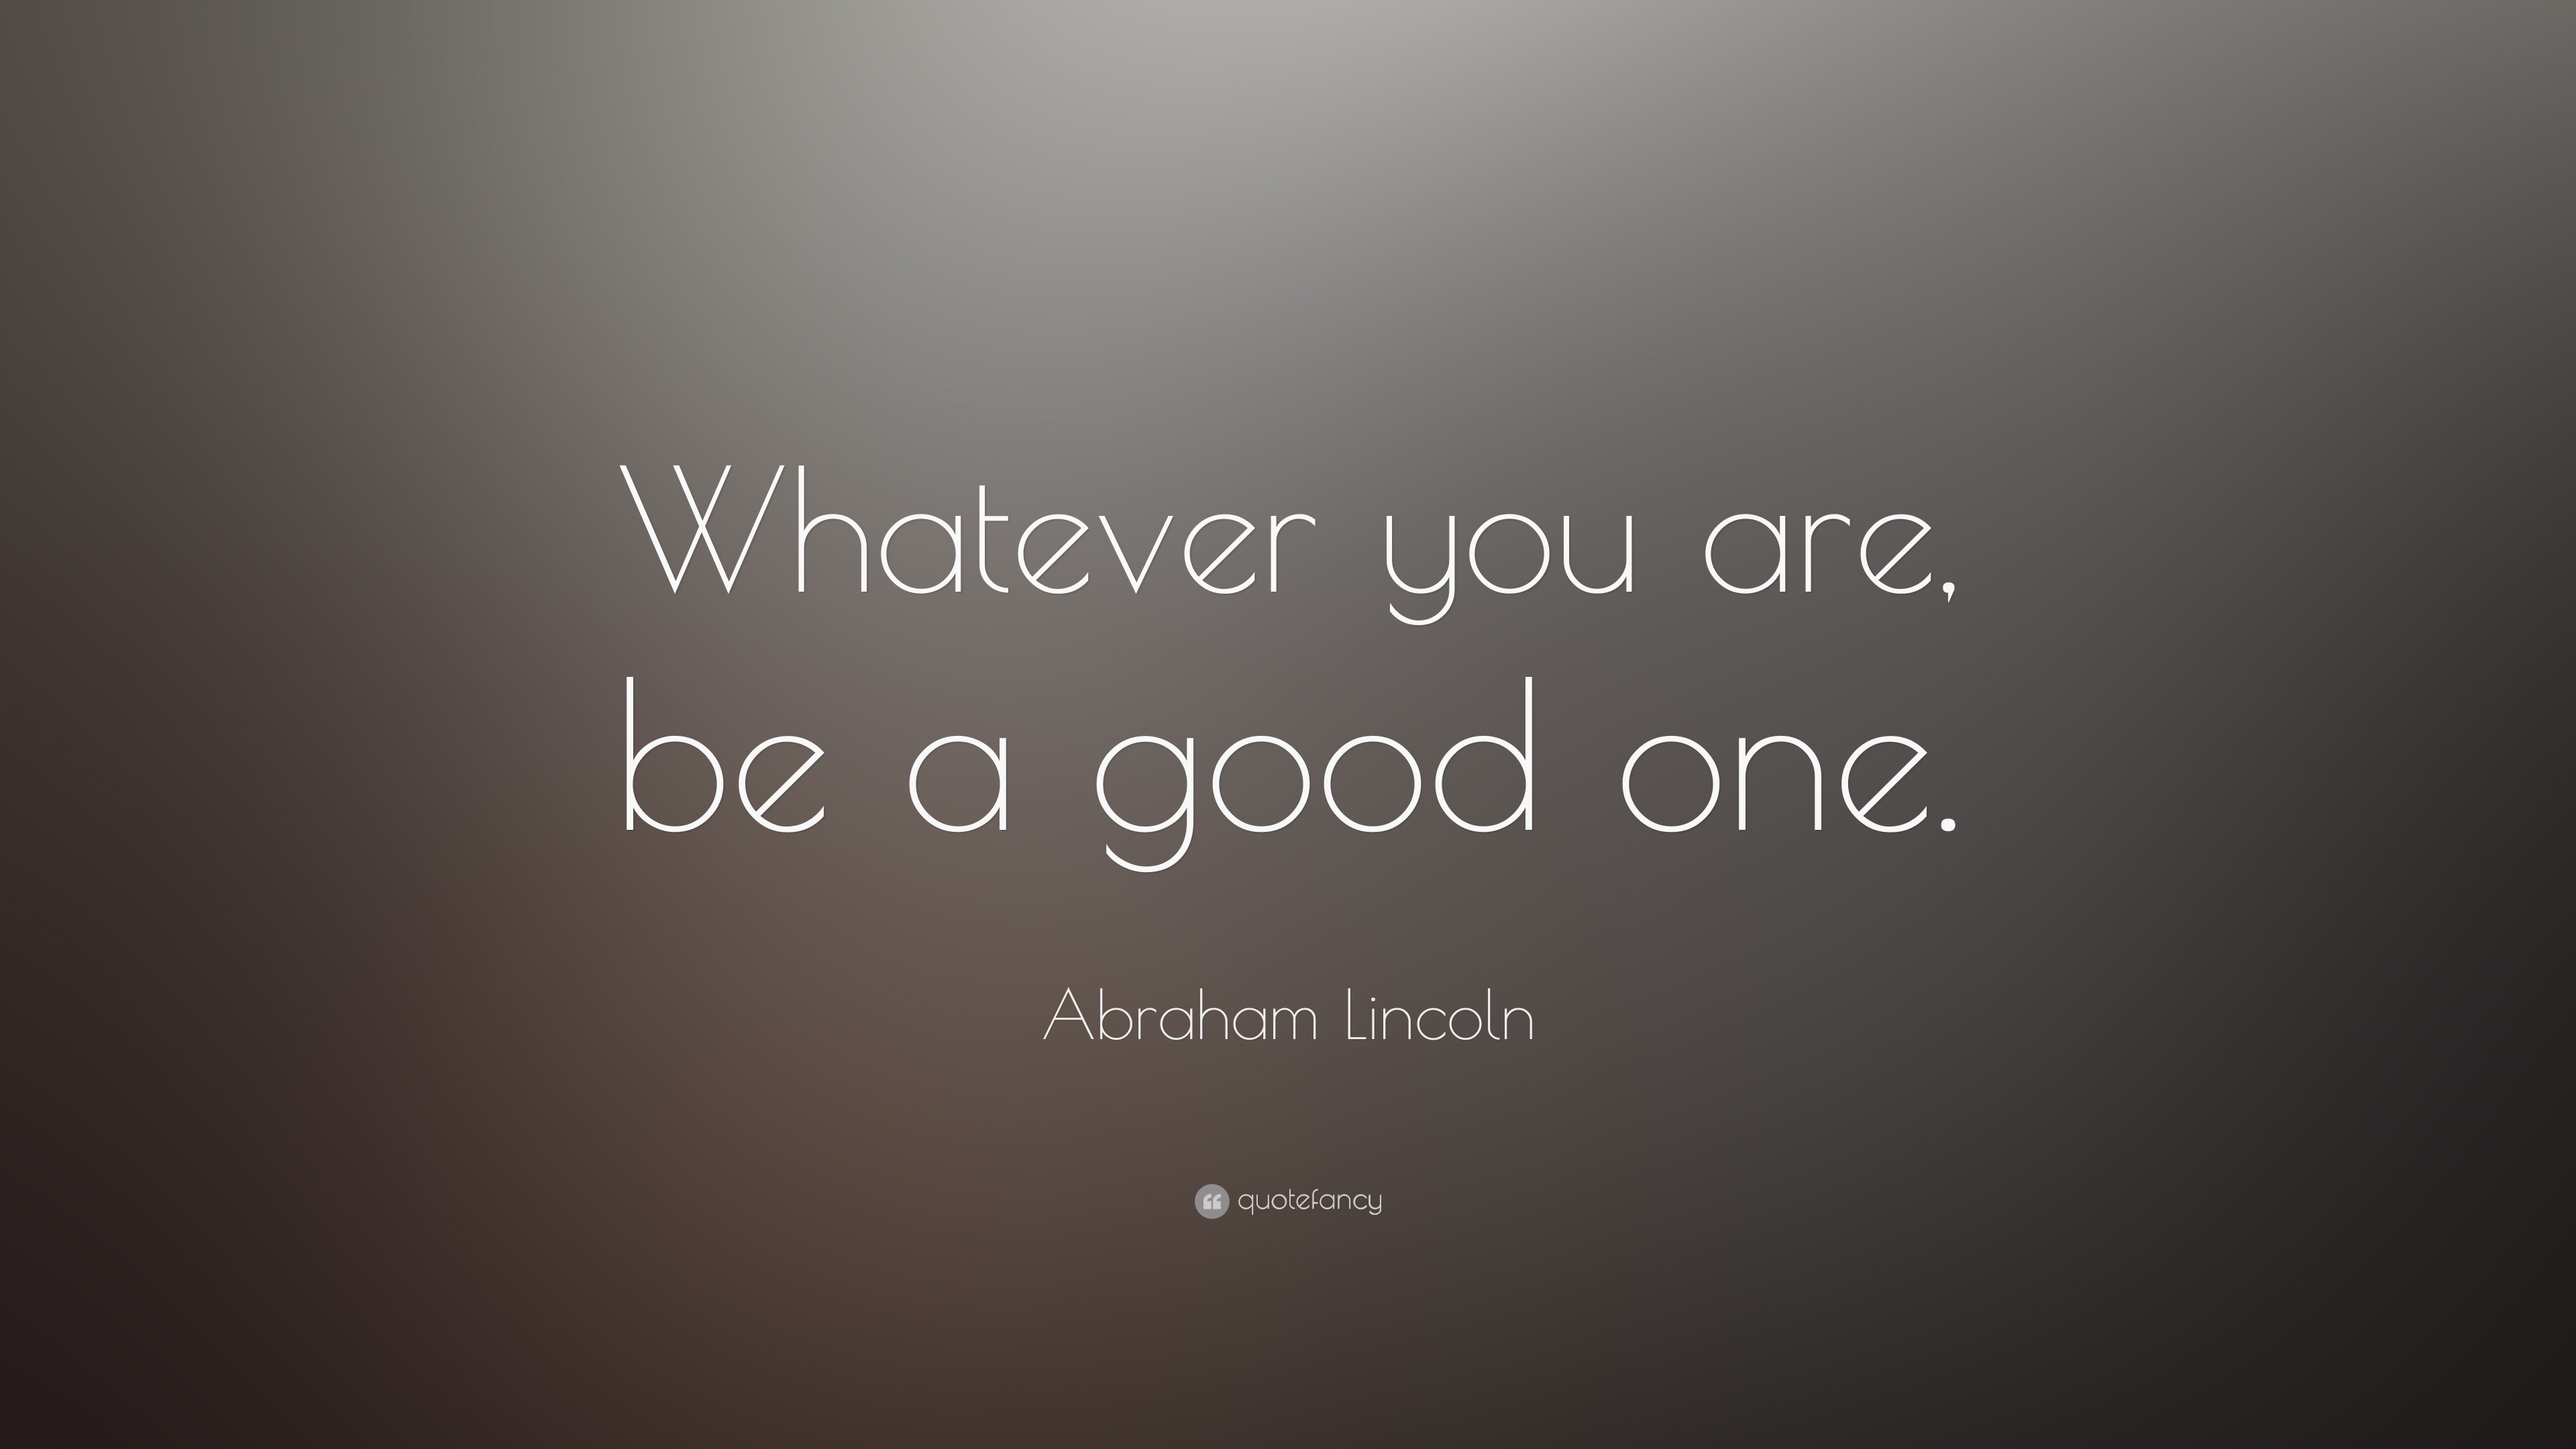 3840x2160 Abraham Lincoln Quote: “Whatever you are, be a good one.”